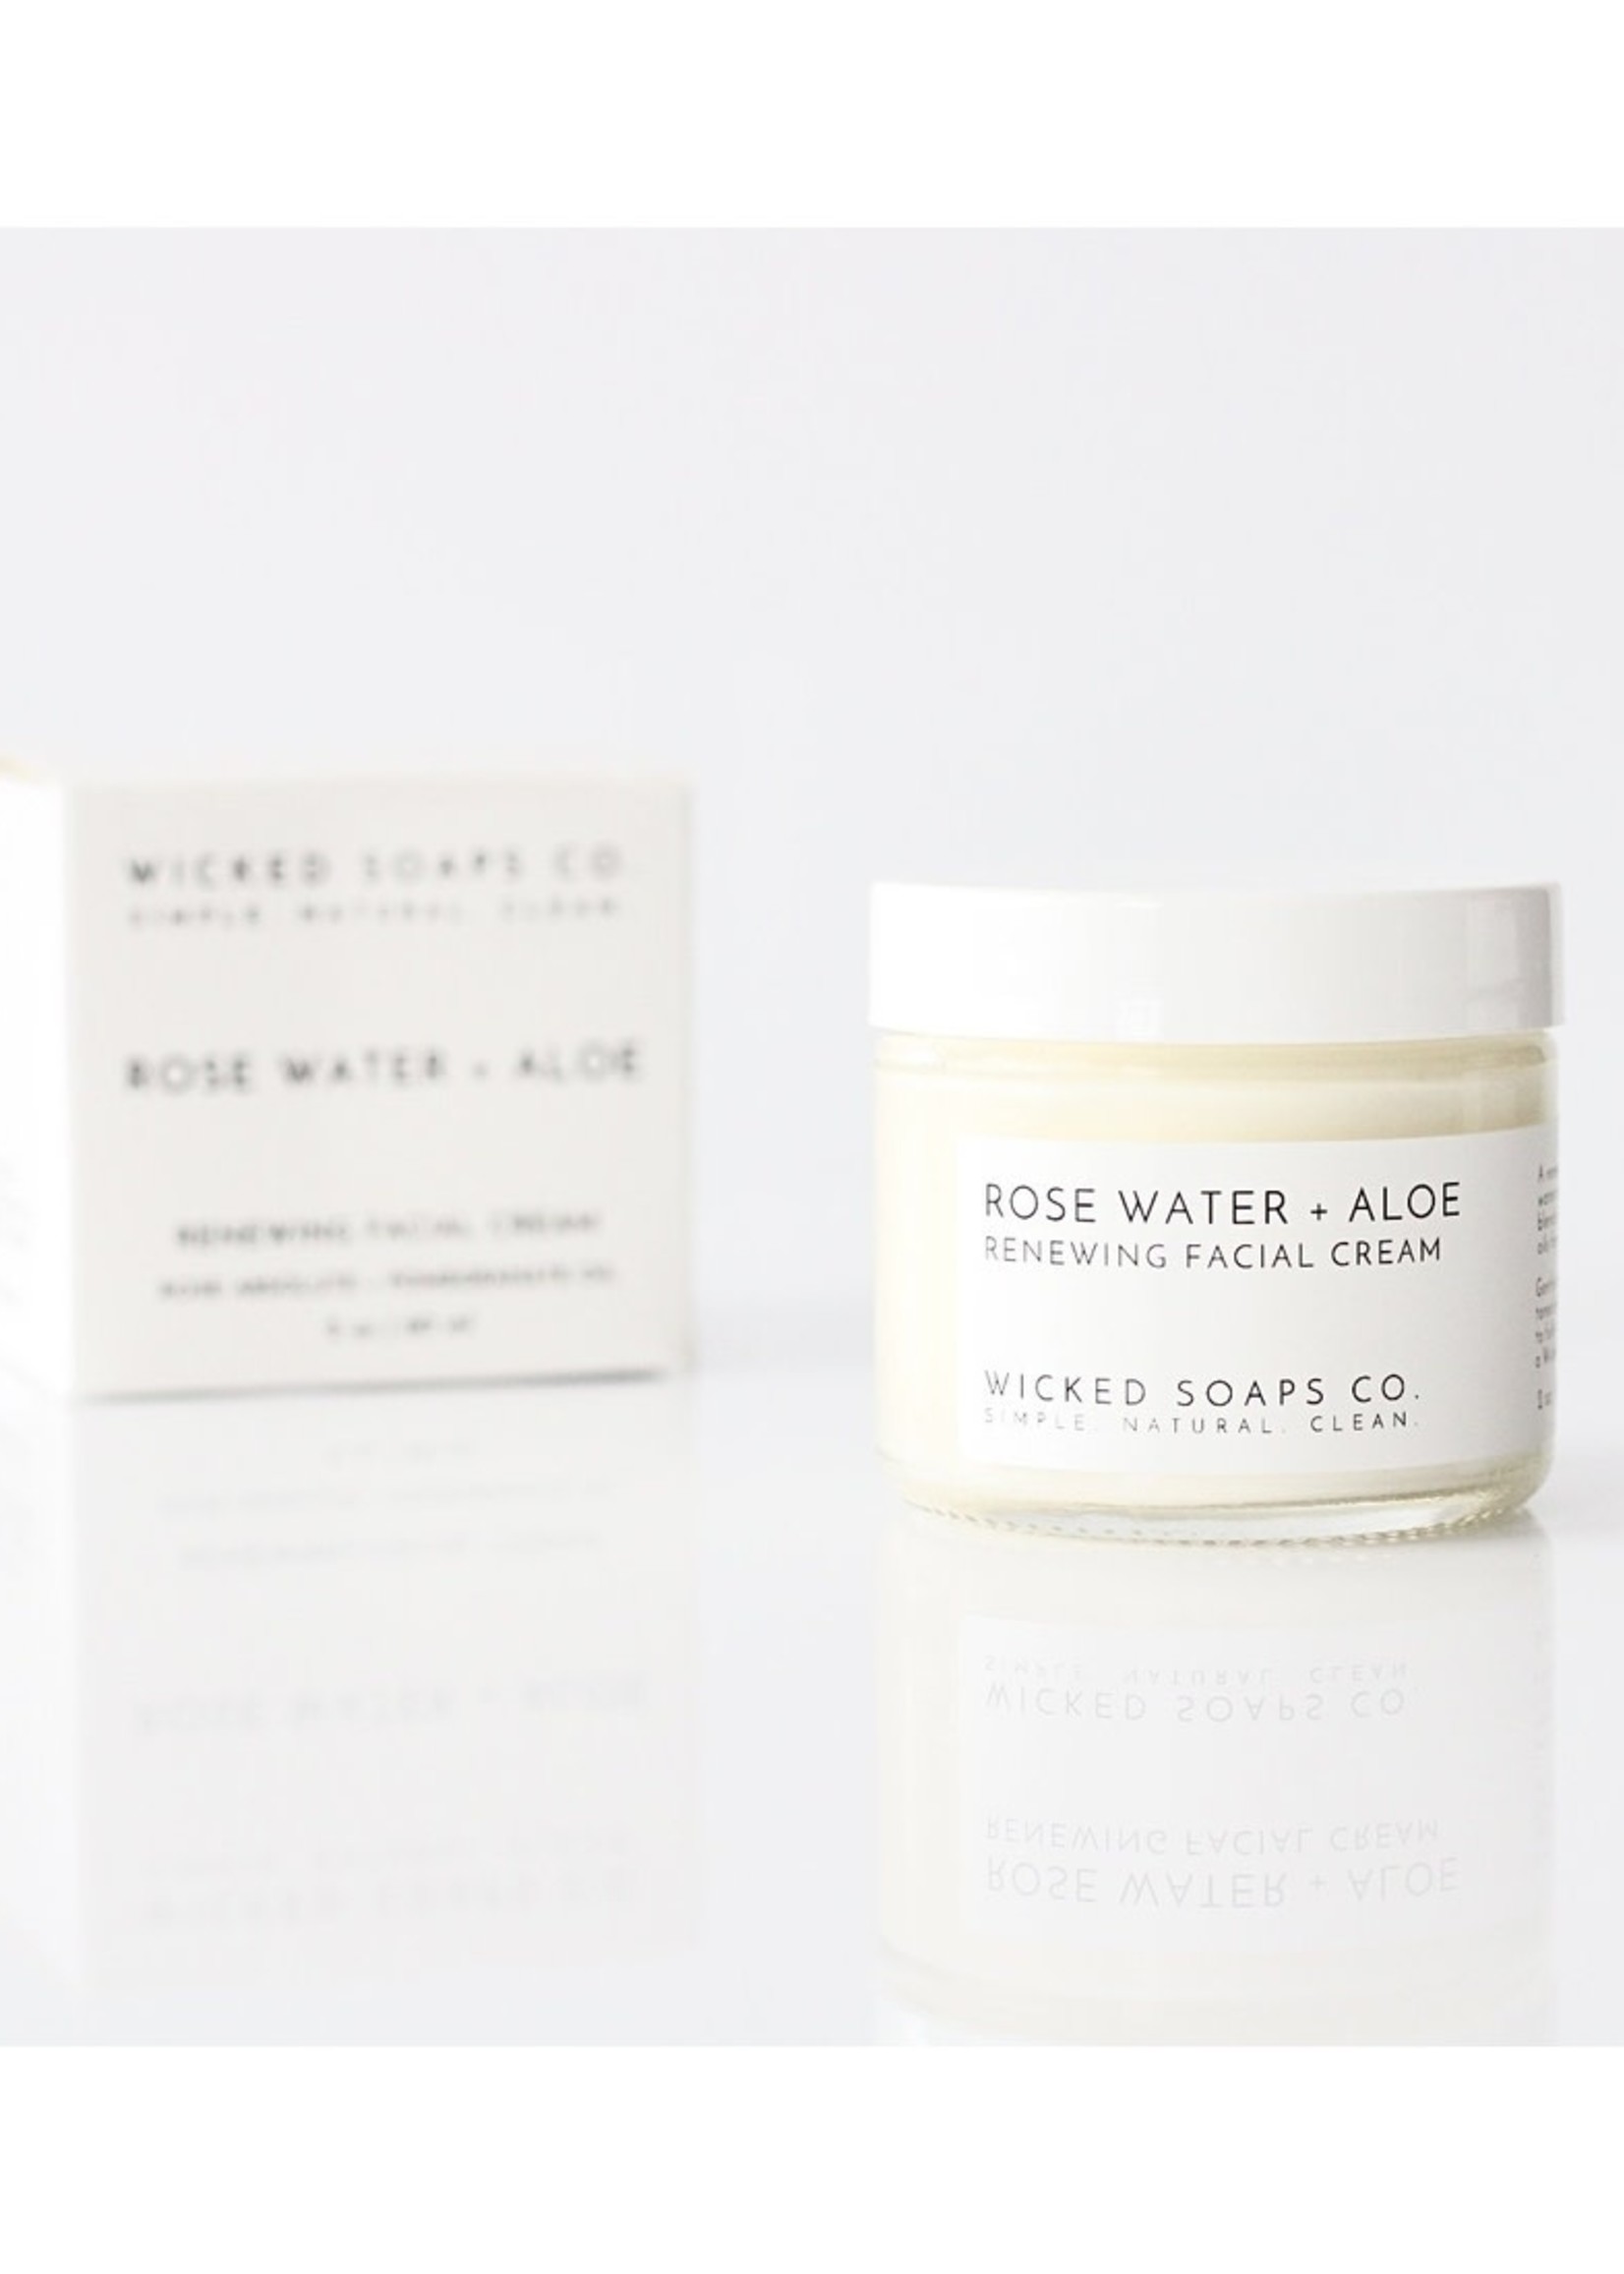 Wicked Soaps Co. Rose Water + Aloe Facial Cream